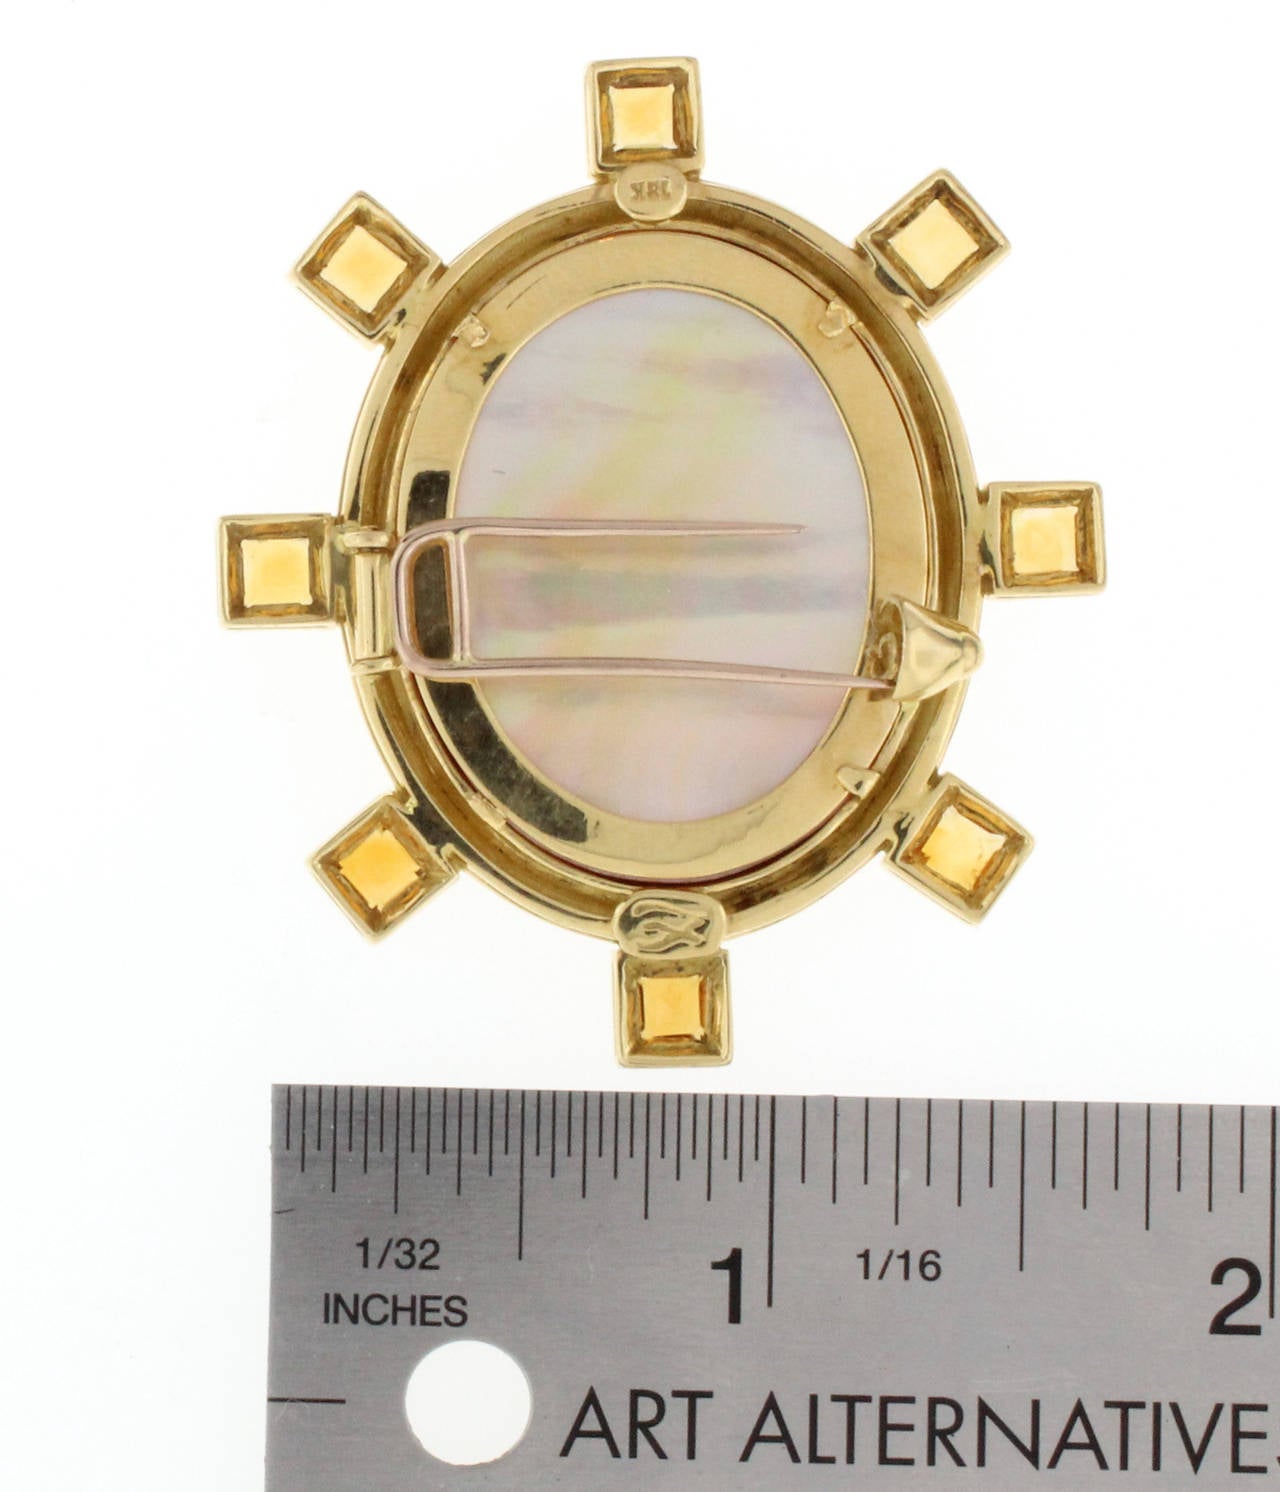 This Elizabeth Locke brooch is 19 karat yellow gold and features maroon Venetian glass with a colonial intaglio.  The brooch also features 8 square citrines around the center oval Venetian glass. The brooch measures 2 inches long by 1.75 inches in